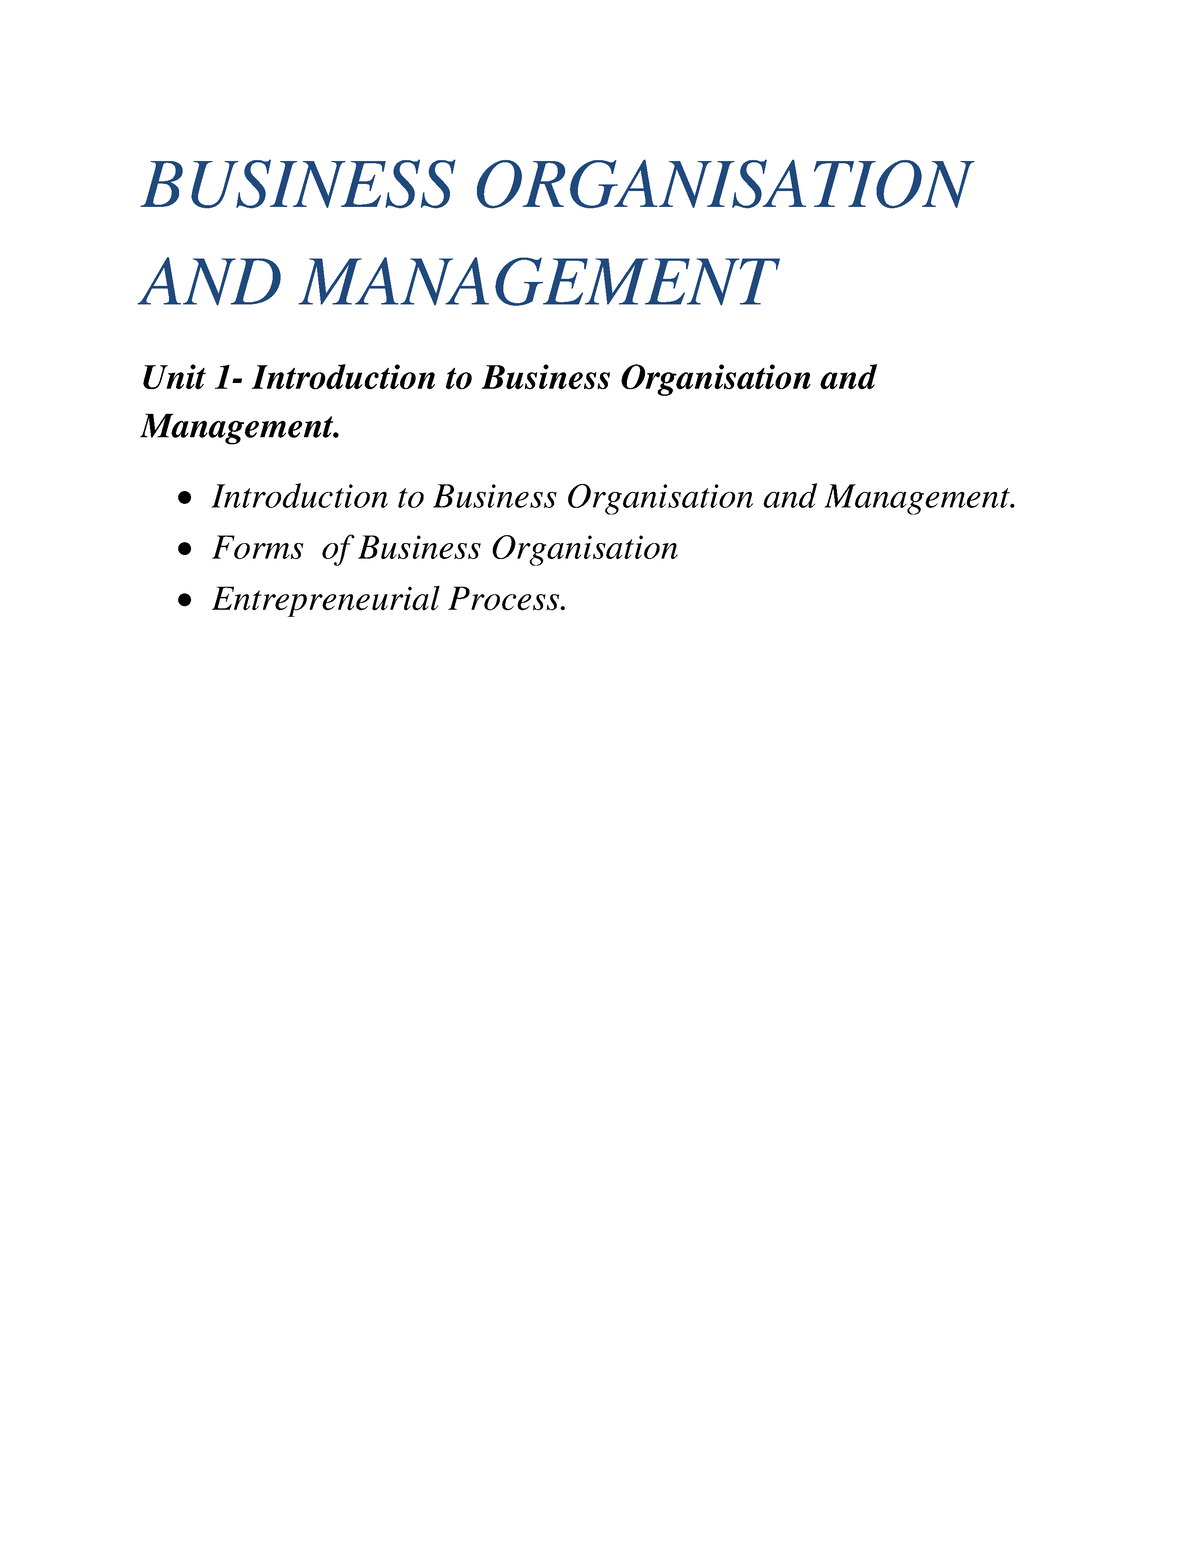 Bom unit 1 - IMPORTANT NOTES - BUSINESS ORGANISATION AND MANAGEMENT ...